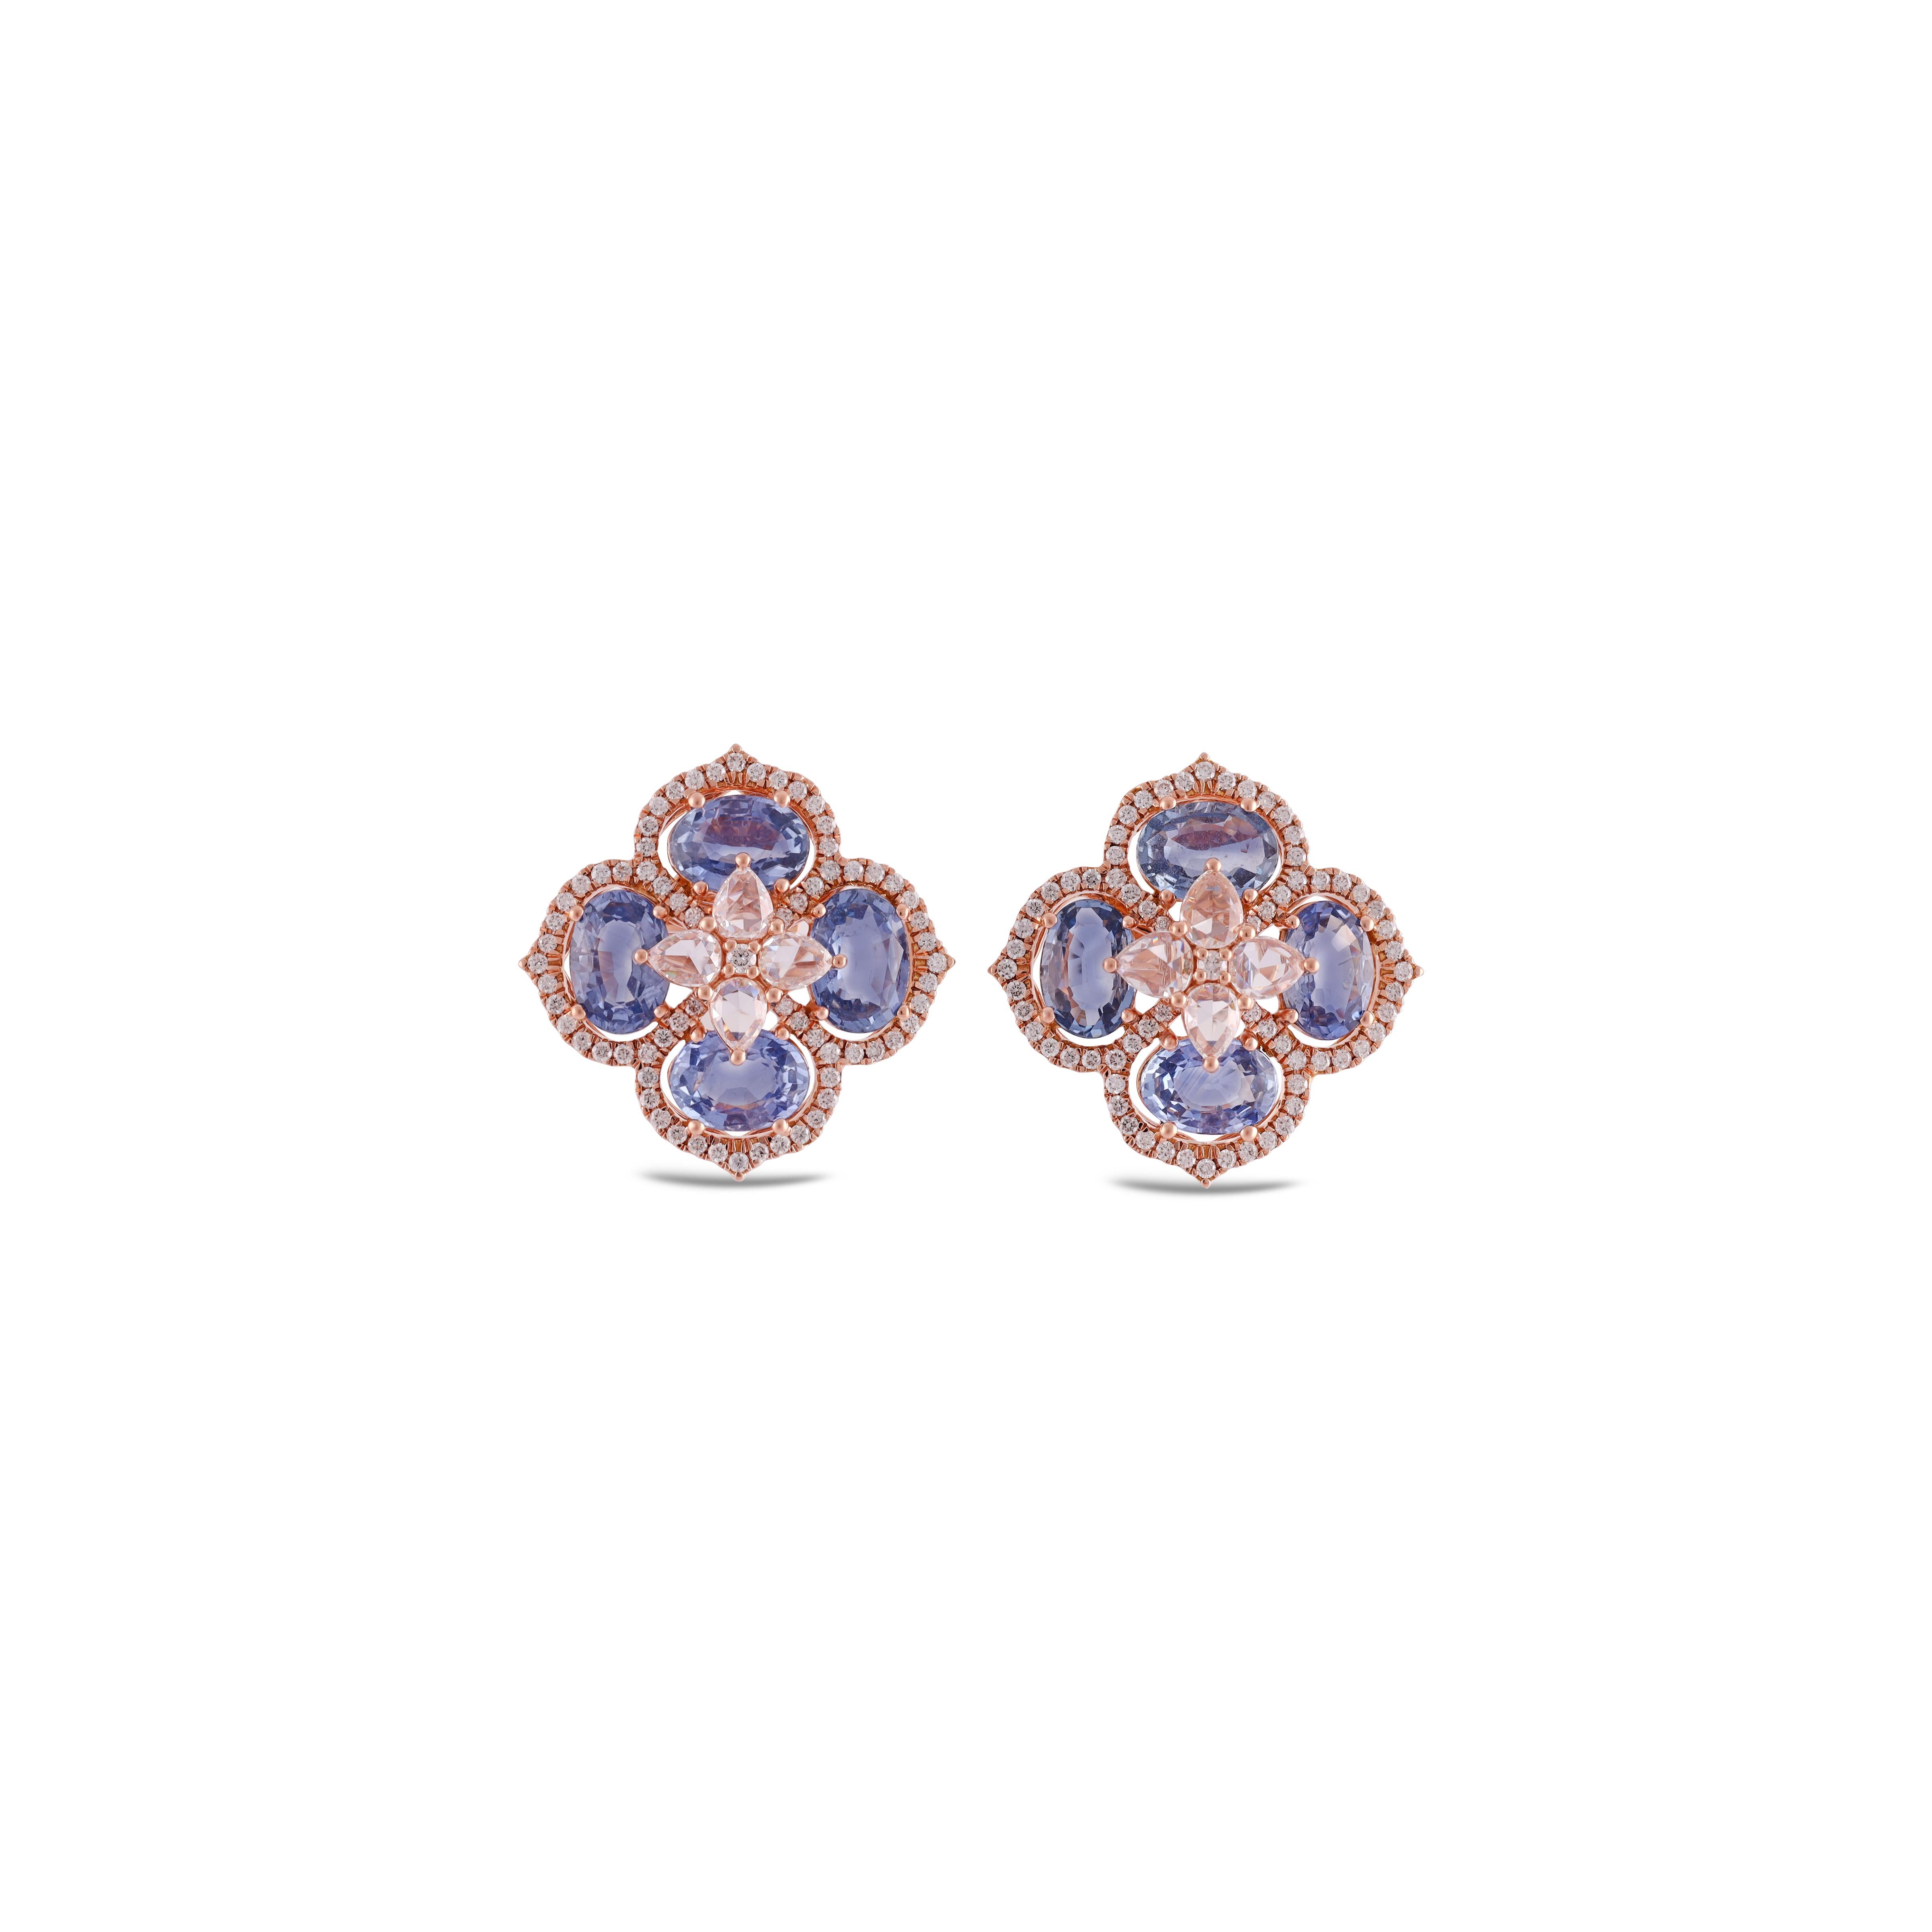 A stunning, fine and impressive pair of  6.66 carat blue sapphire & 1.34 Carat  Diamond with Solid 18k Rose Gold. 

Studs create a subtle beauty while showcasing the colors of the natural precious gemstones and illuminating diamonds making a